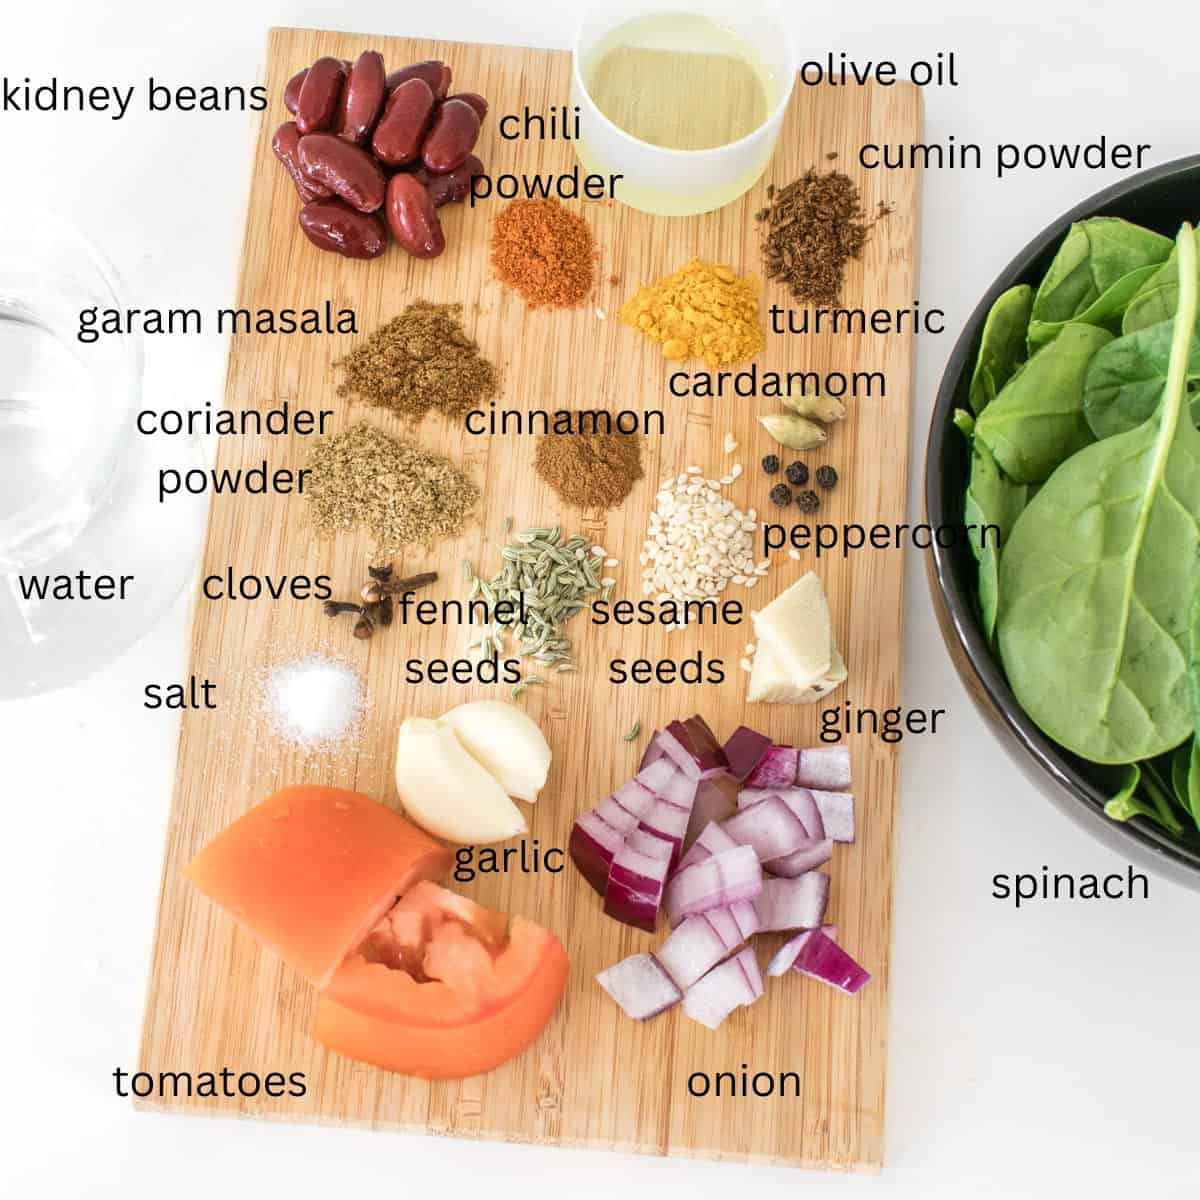 all the ingredients on a wooden board.